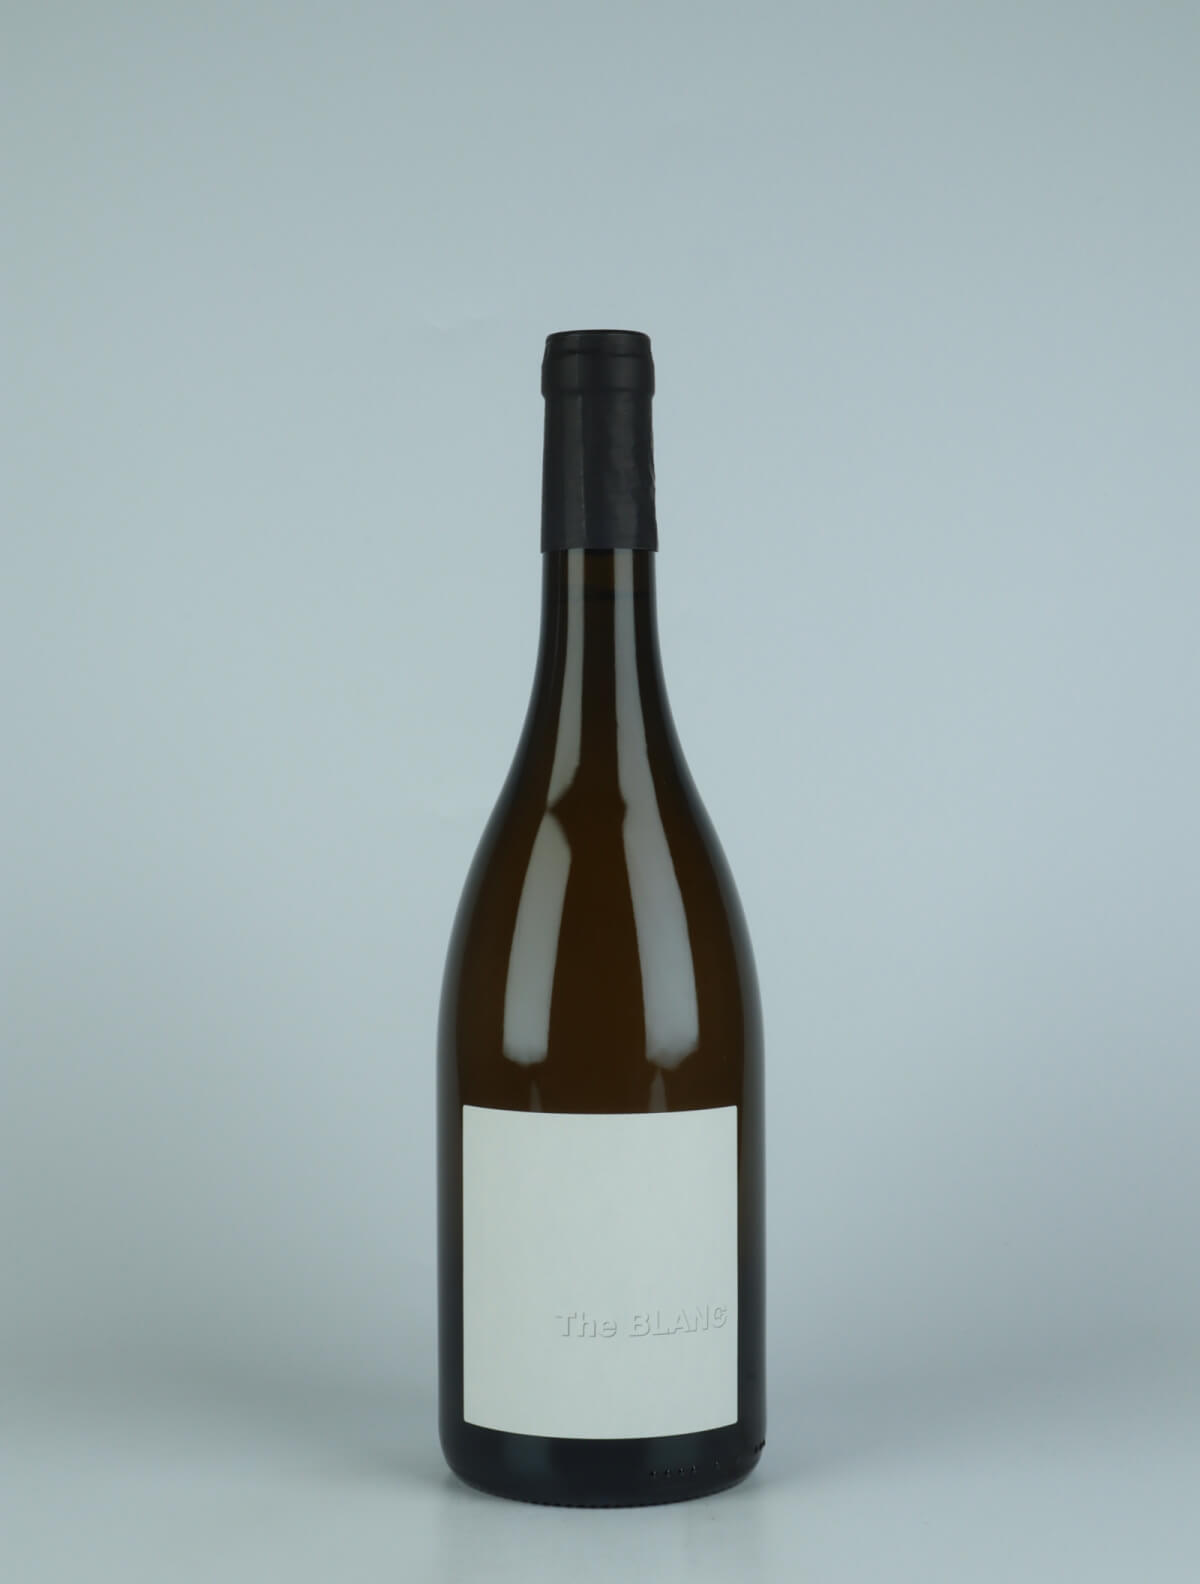 A bottle 2021 The Blanc White wine from Patrick Bouju, Auvergne in France